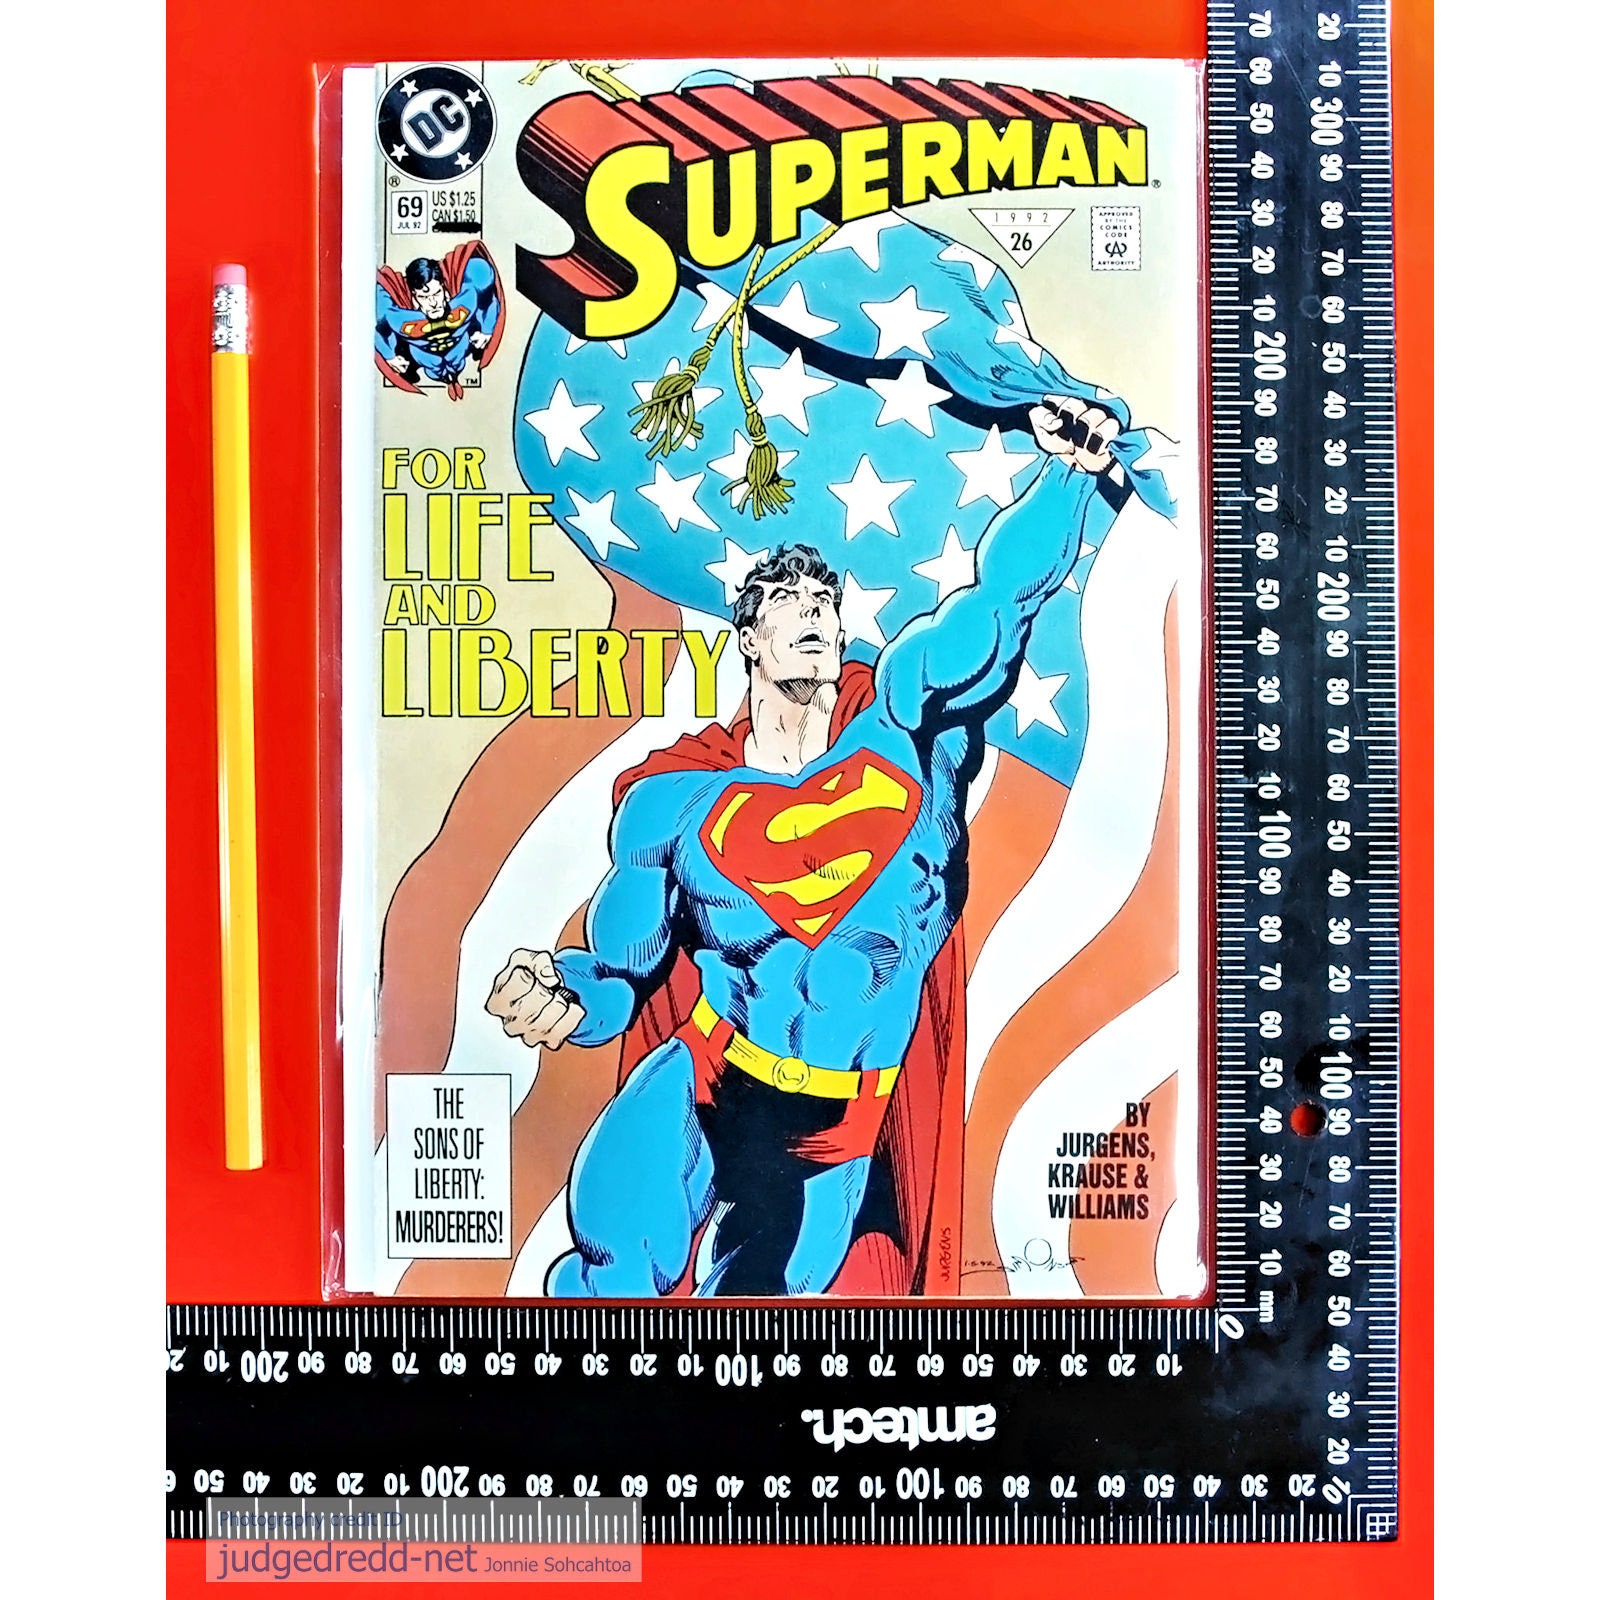 CheckOutStore Crystal Clear Silver Age Comic Book Bags with